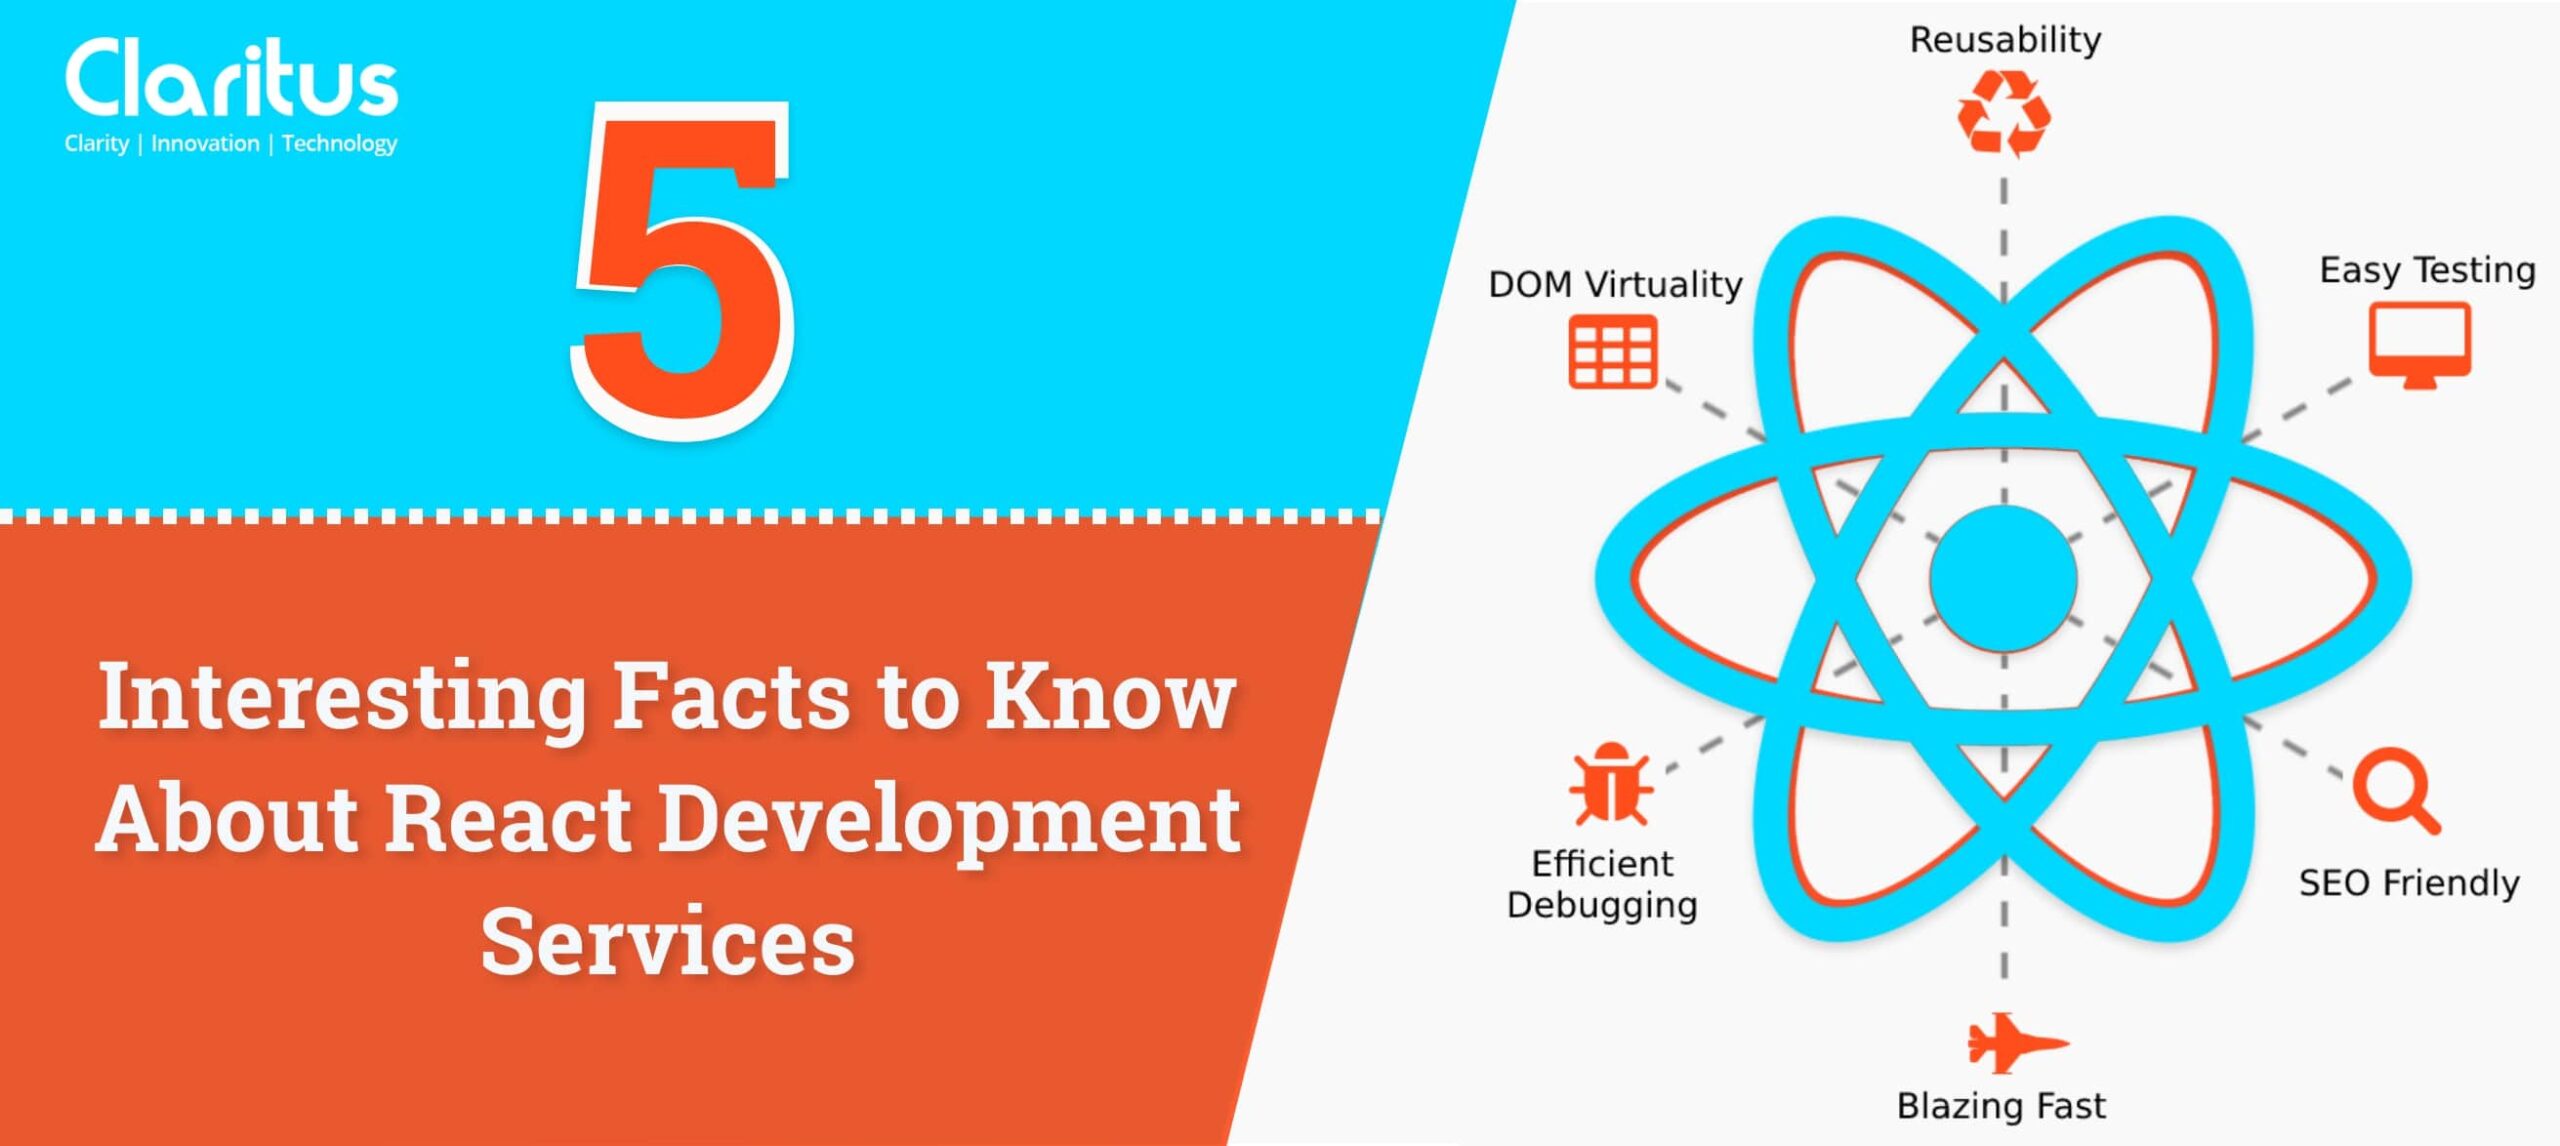 REACT DEVELOPMENT SERVICES BLOG COVER@2x scaled